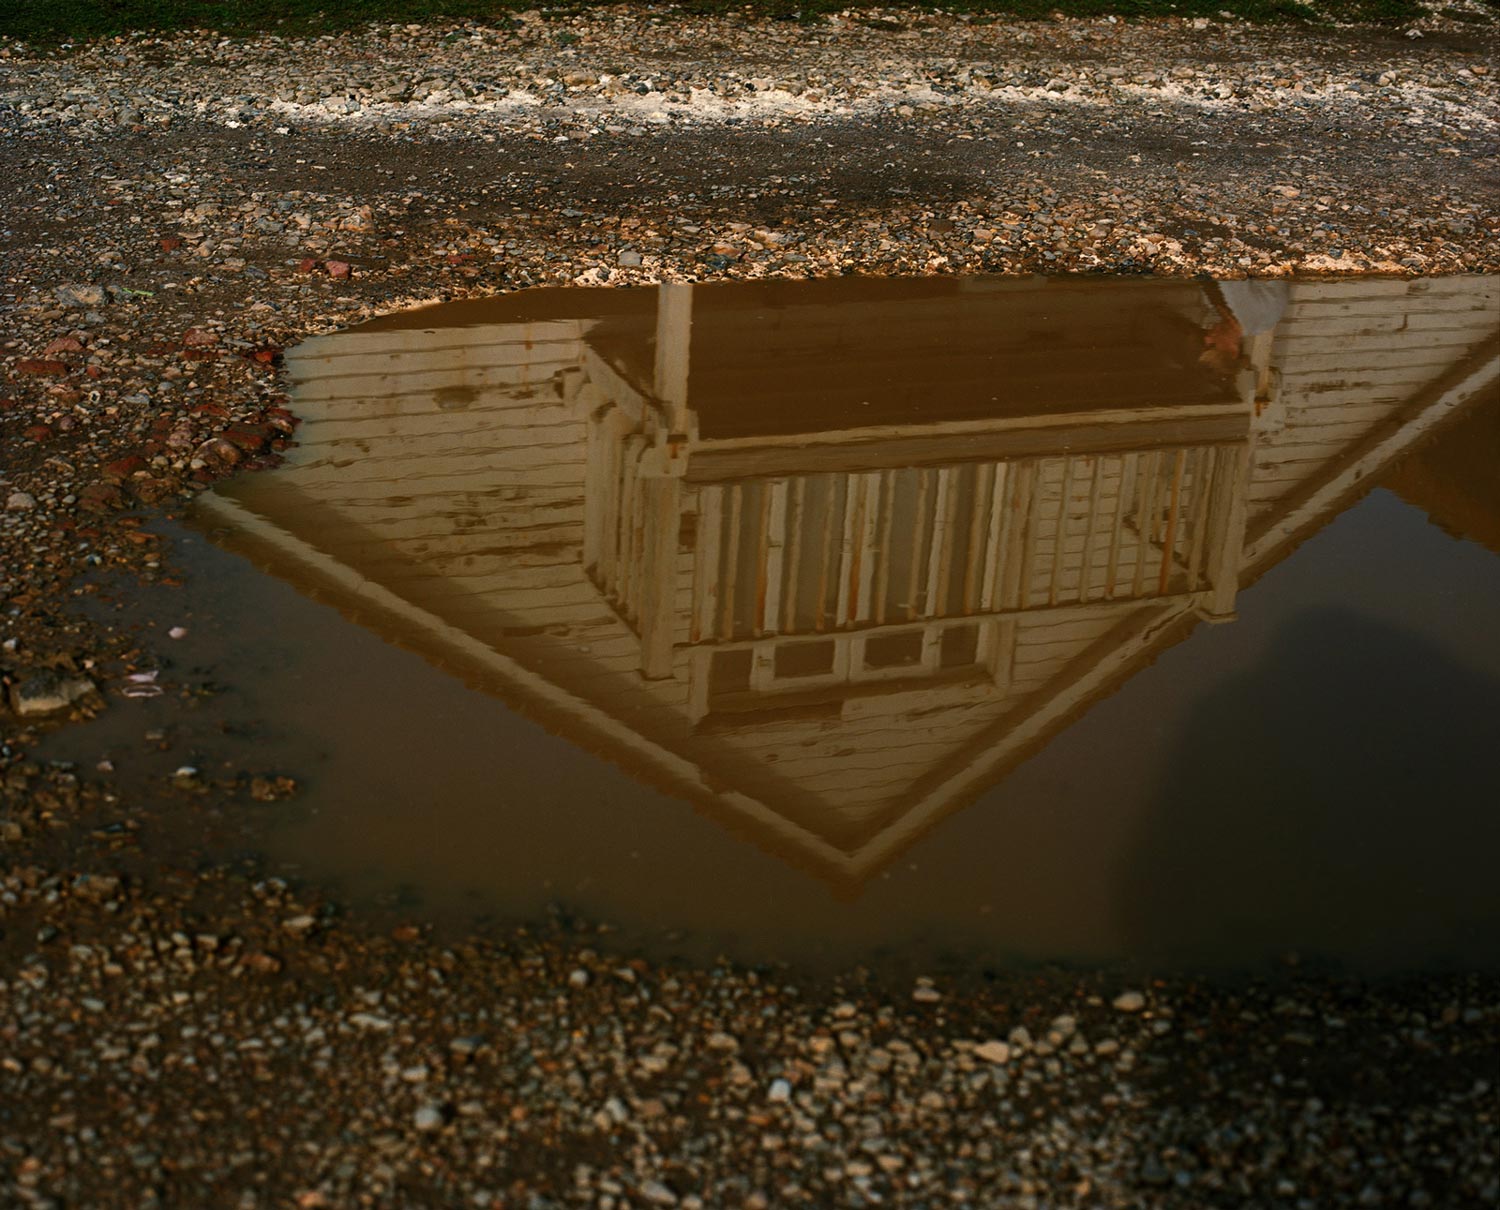 Reflection of a house in a merky puddle, analogue photography.